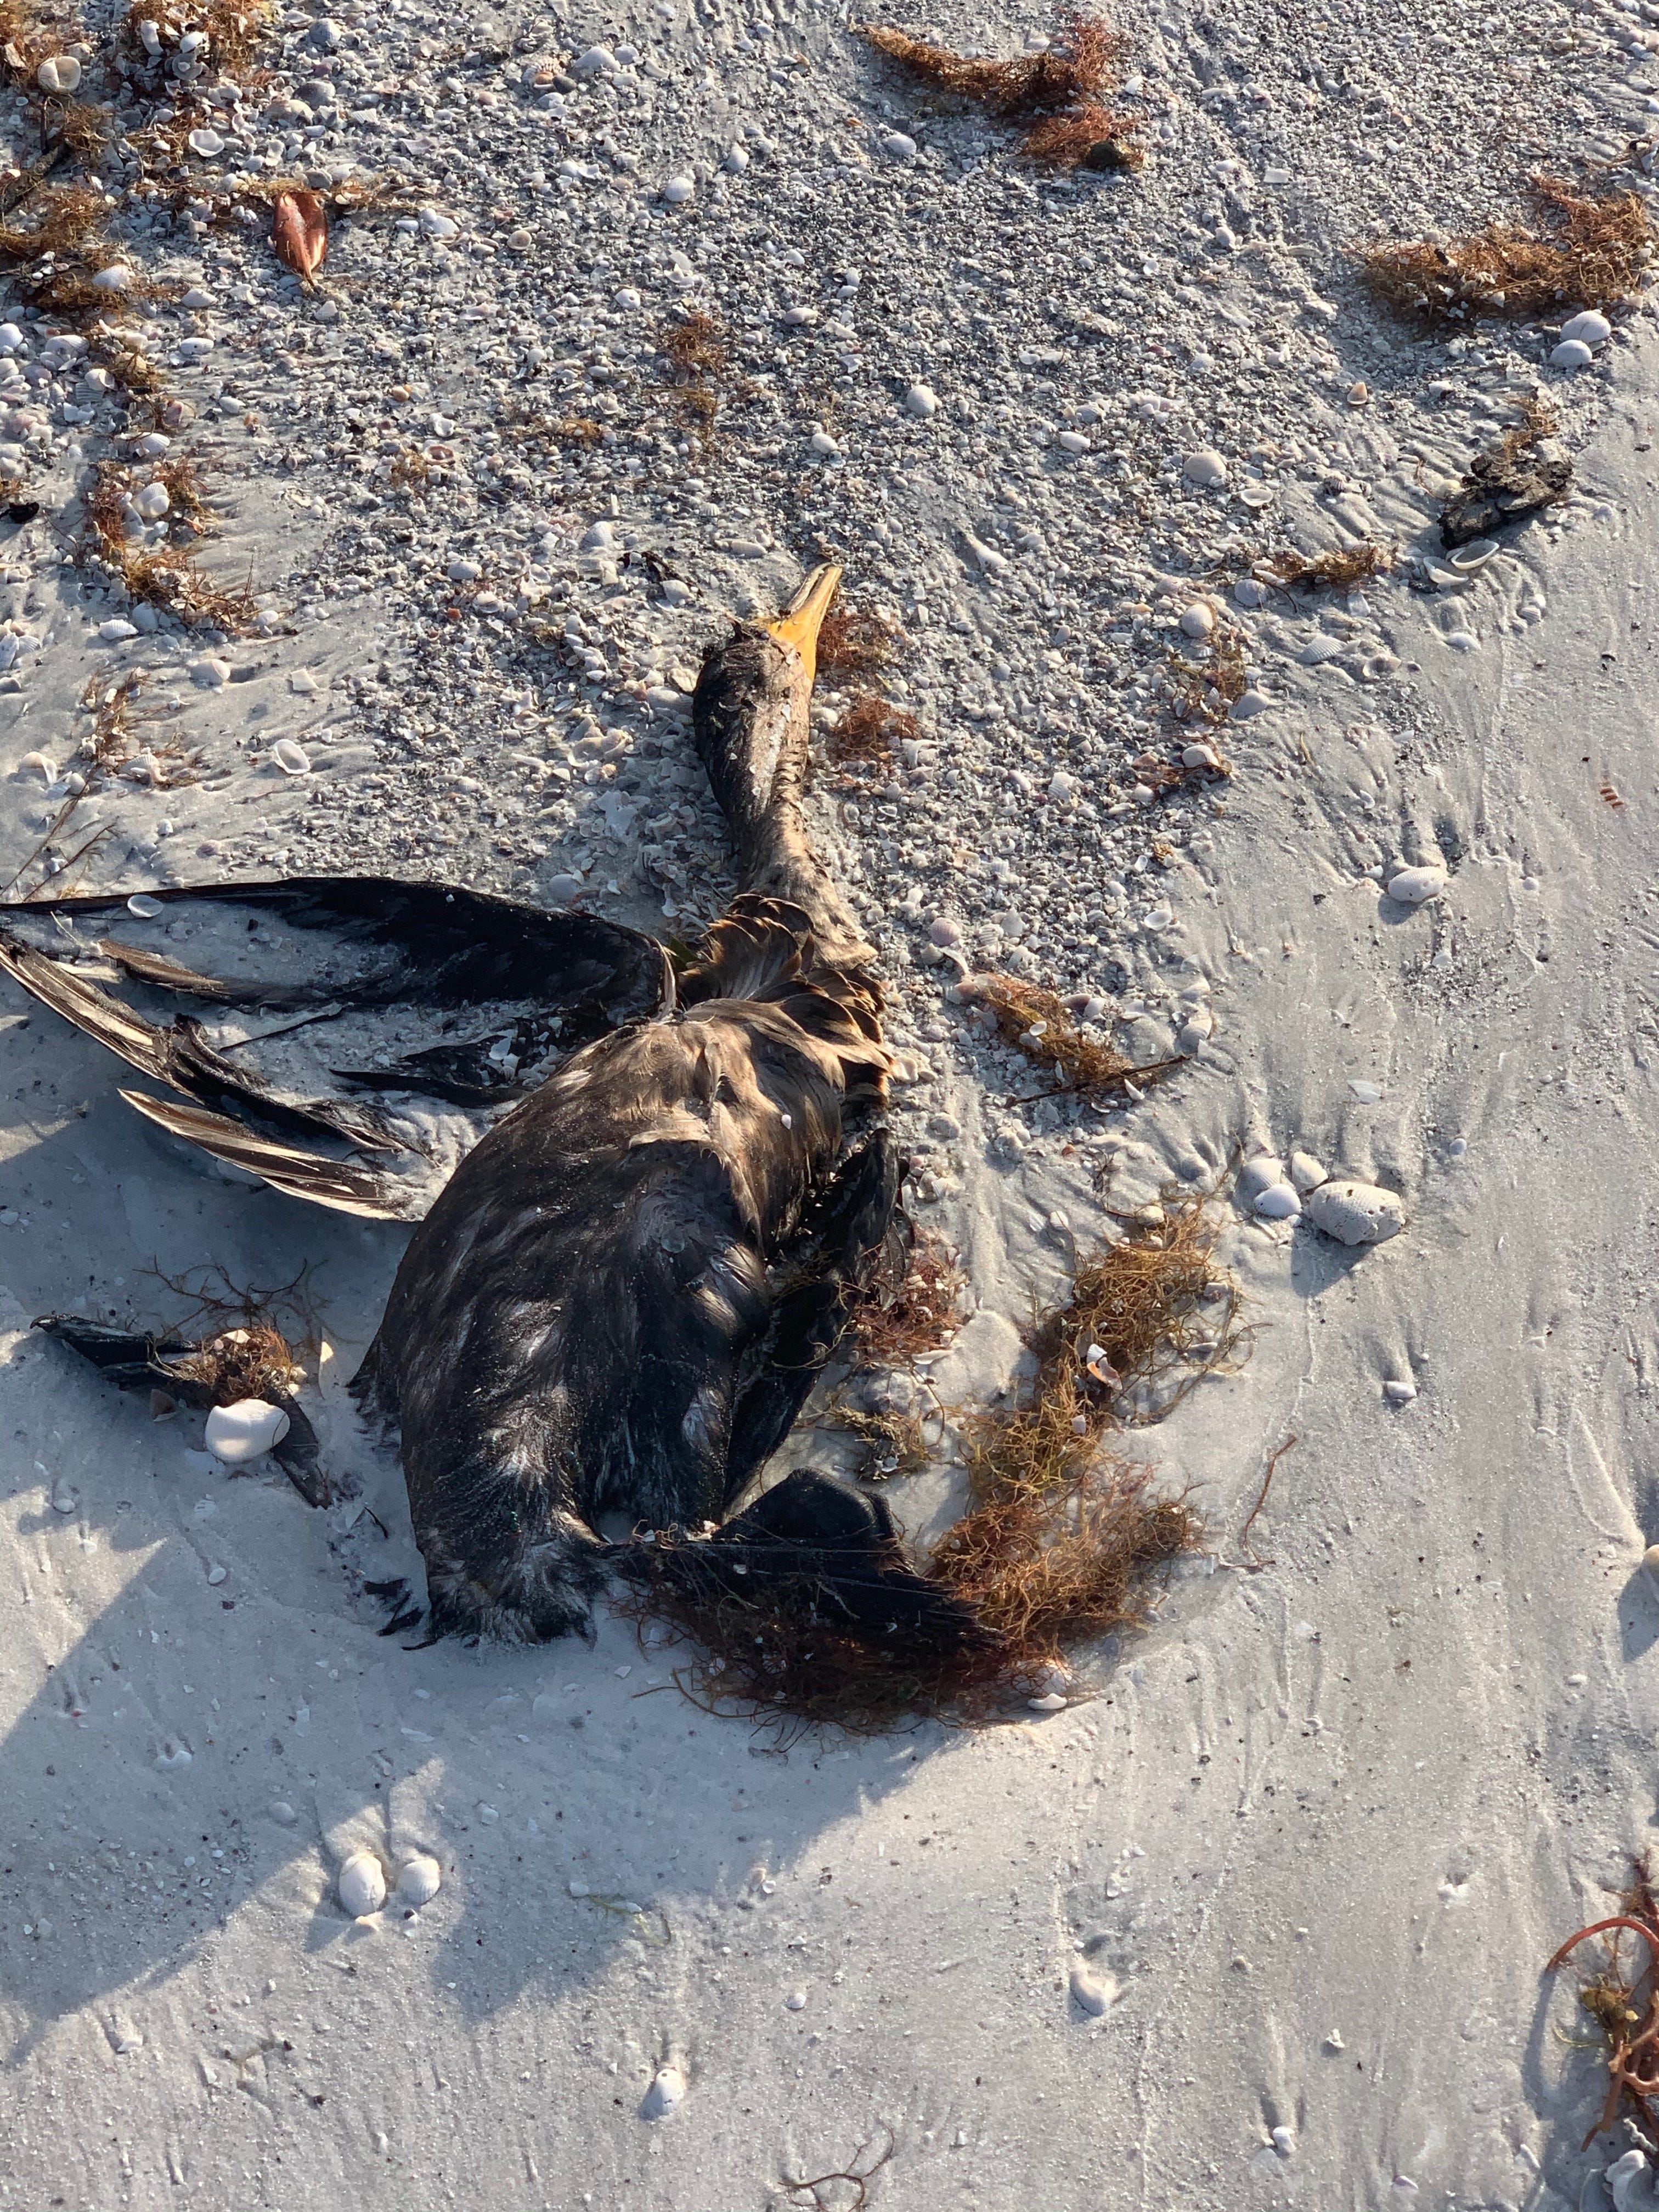 Joanna D. Metzger, a Marco Island resident, said she saw a dead loggerhead turtle that washed ashore close to the JW Marriott Beach Resort during her morning walk on Oct. 17. Metzger said she also saw a dead cormorant, a type of bird, further down the beach.